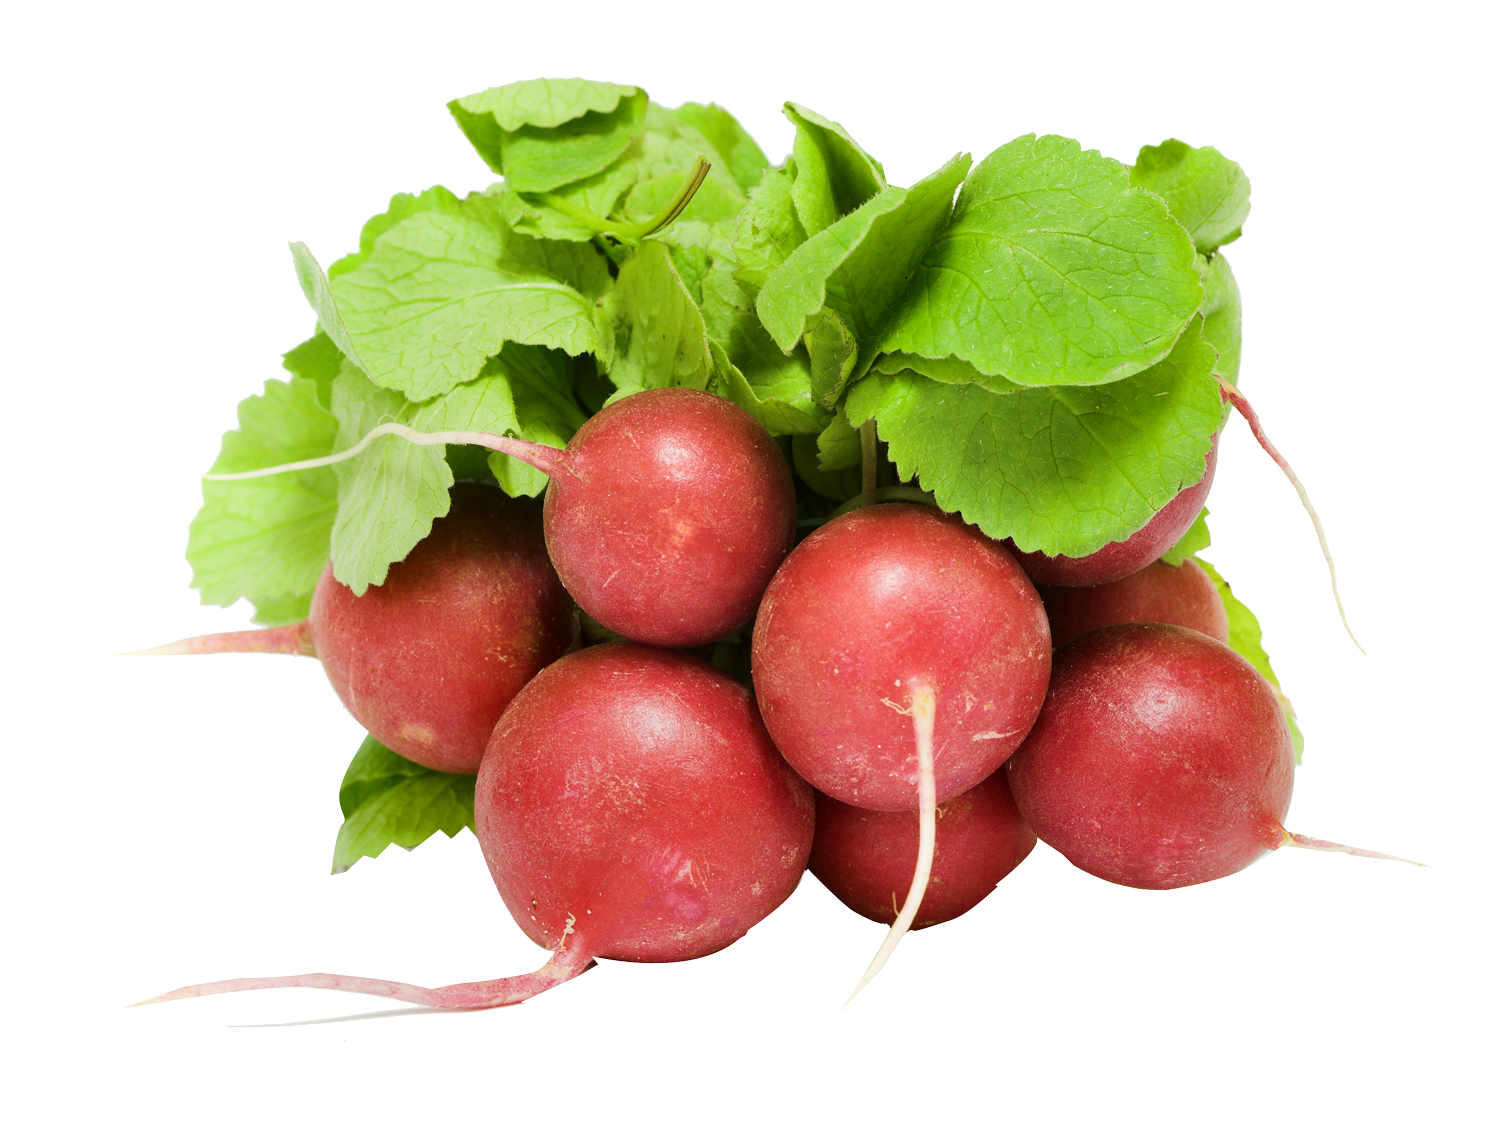 A Bunch Of Radishes With Green Leaves